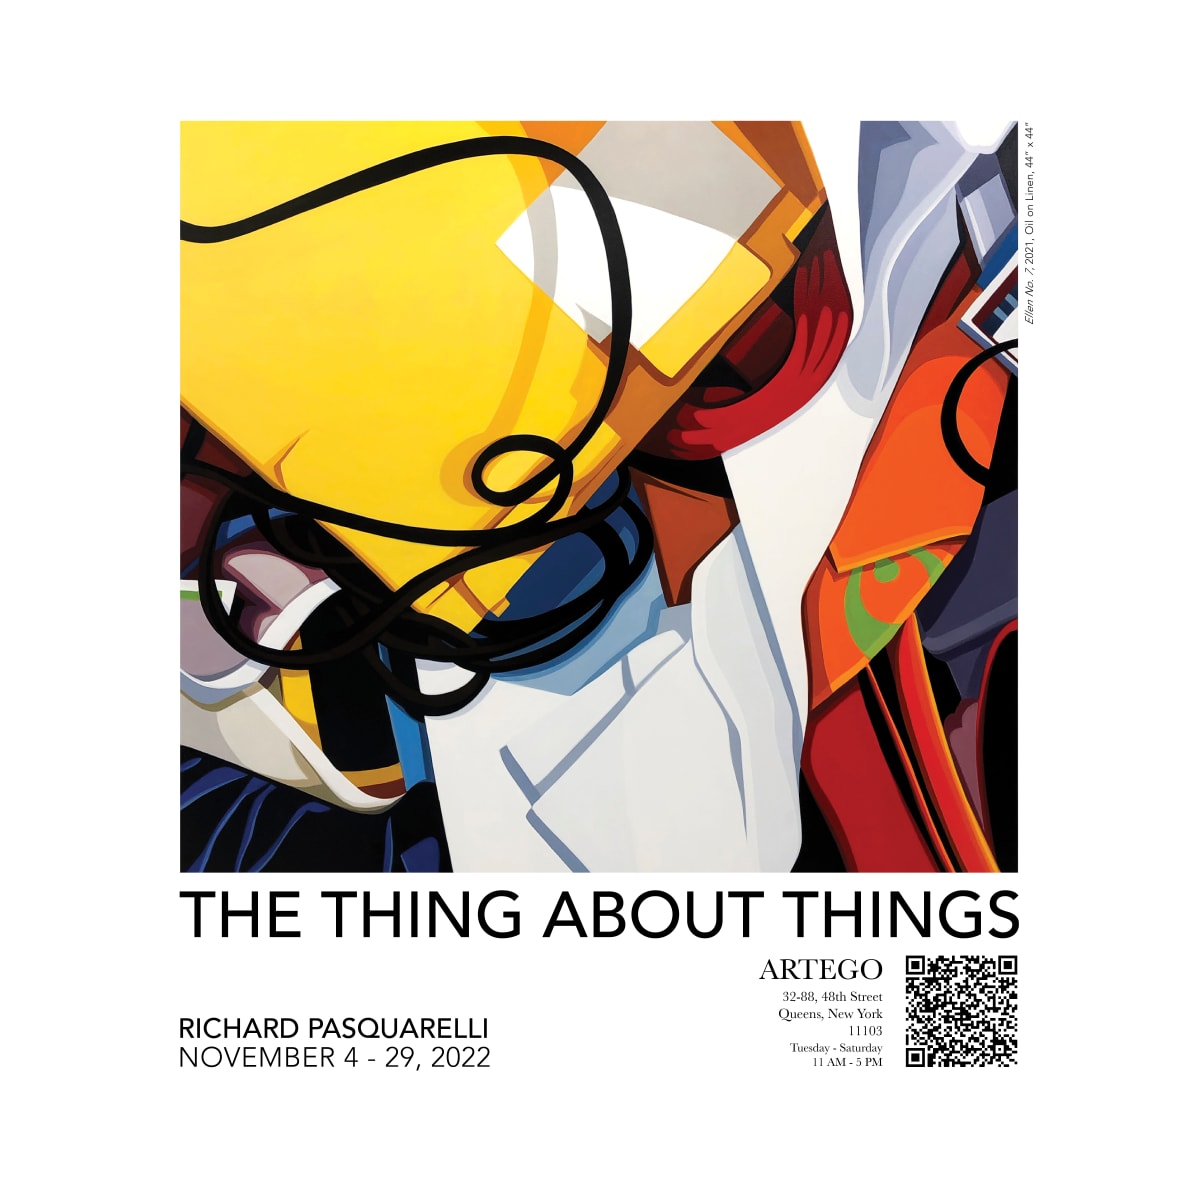 Richard Pasquarelli's "The Thing about Things" Opening Reception